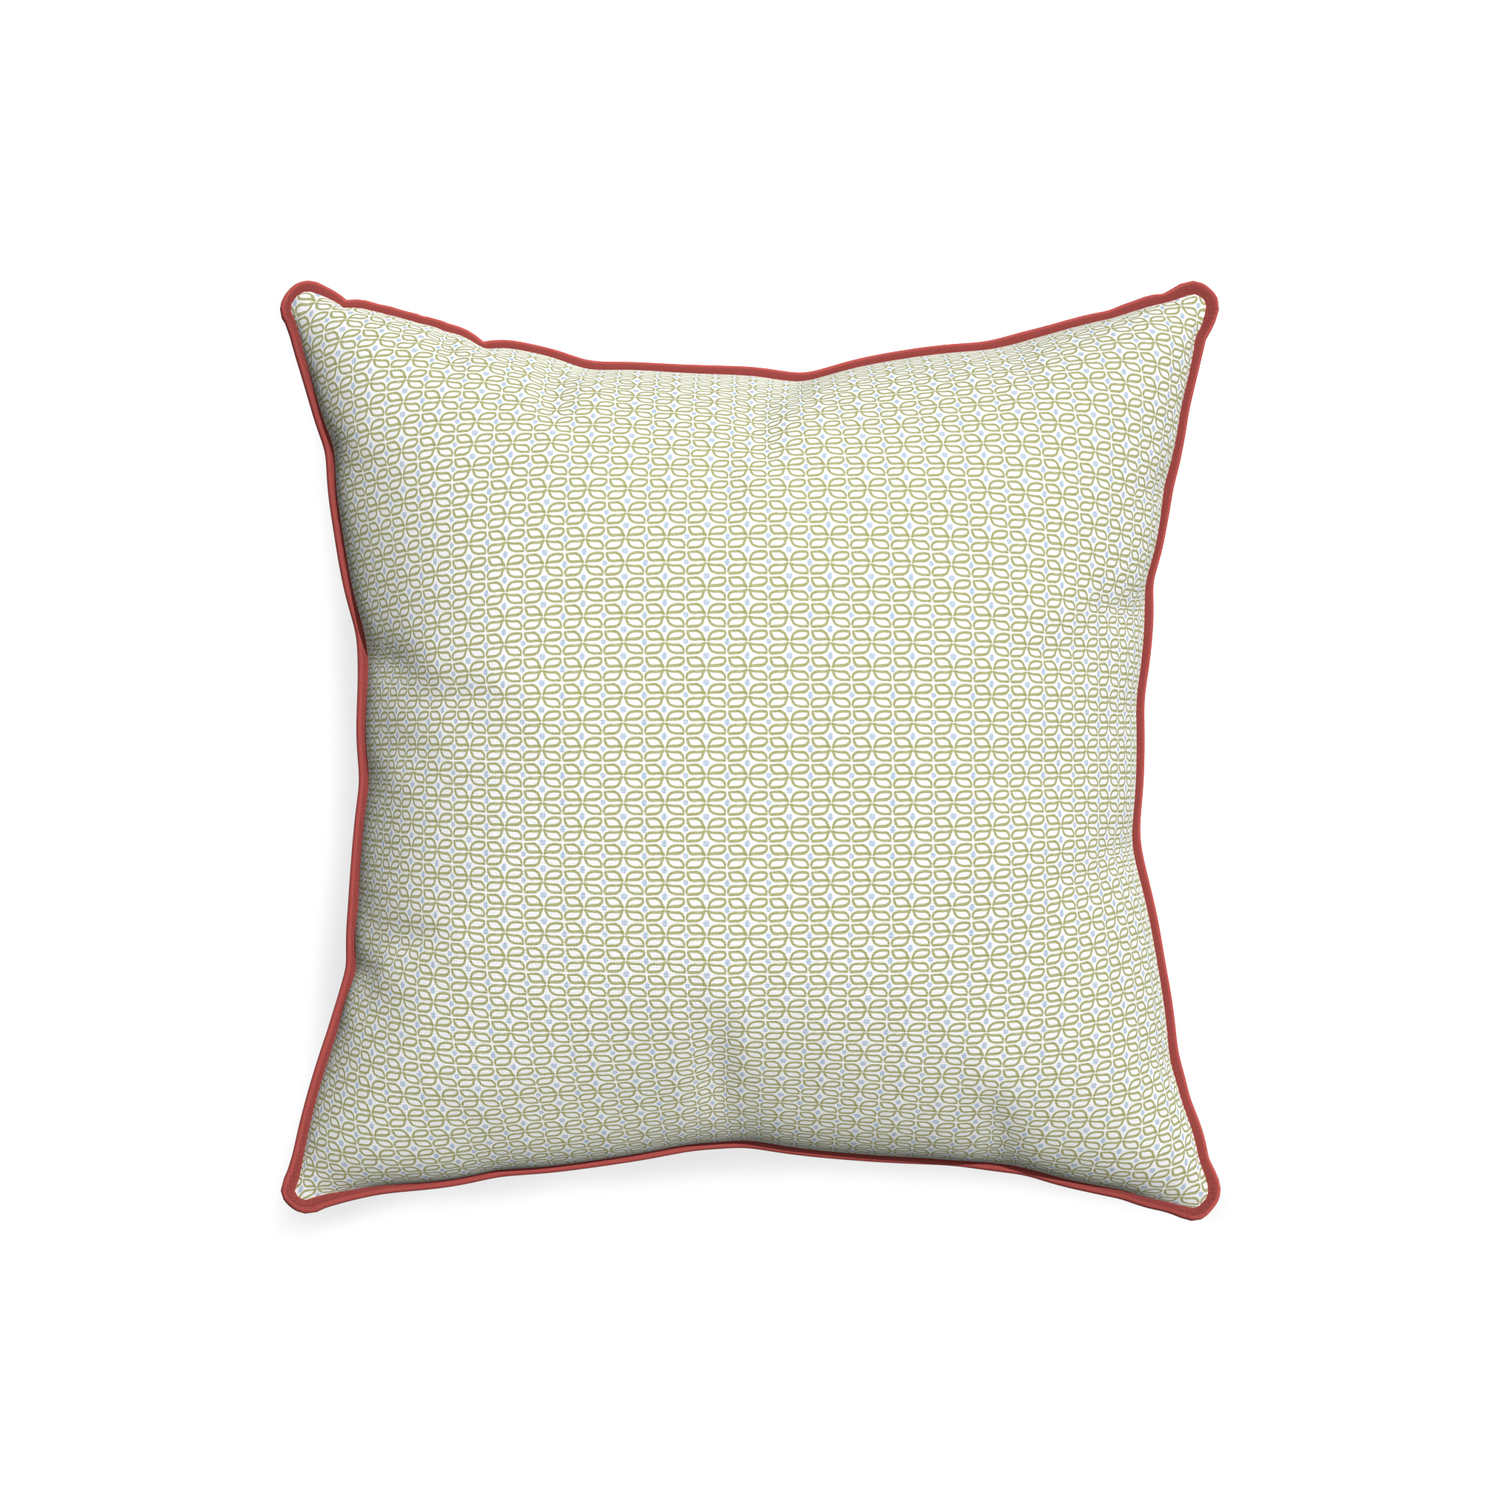 20-square loomi moss custom moss green geometricpillow with c piping on white background